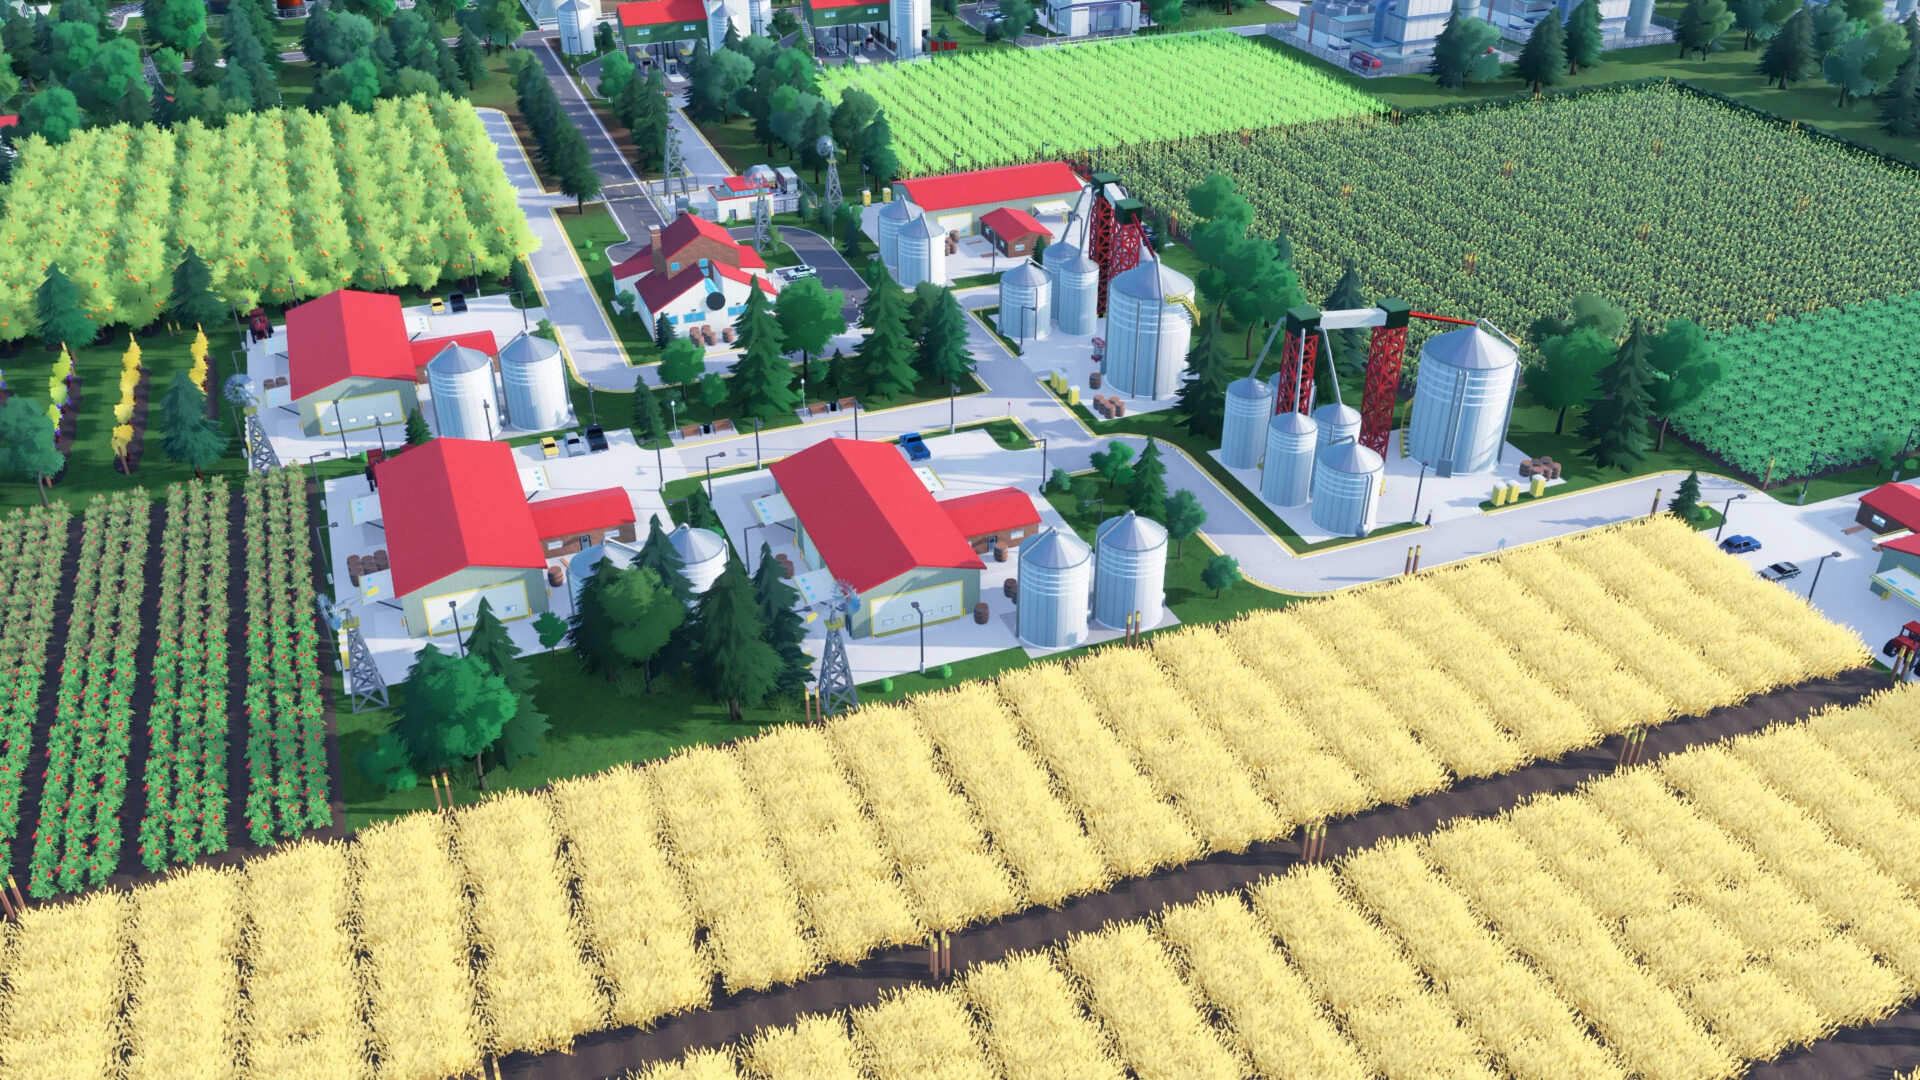 Rise of Industry 2 Steam strategy game: An idyllic farm from Steam strategy game Rise of Industry 2